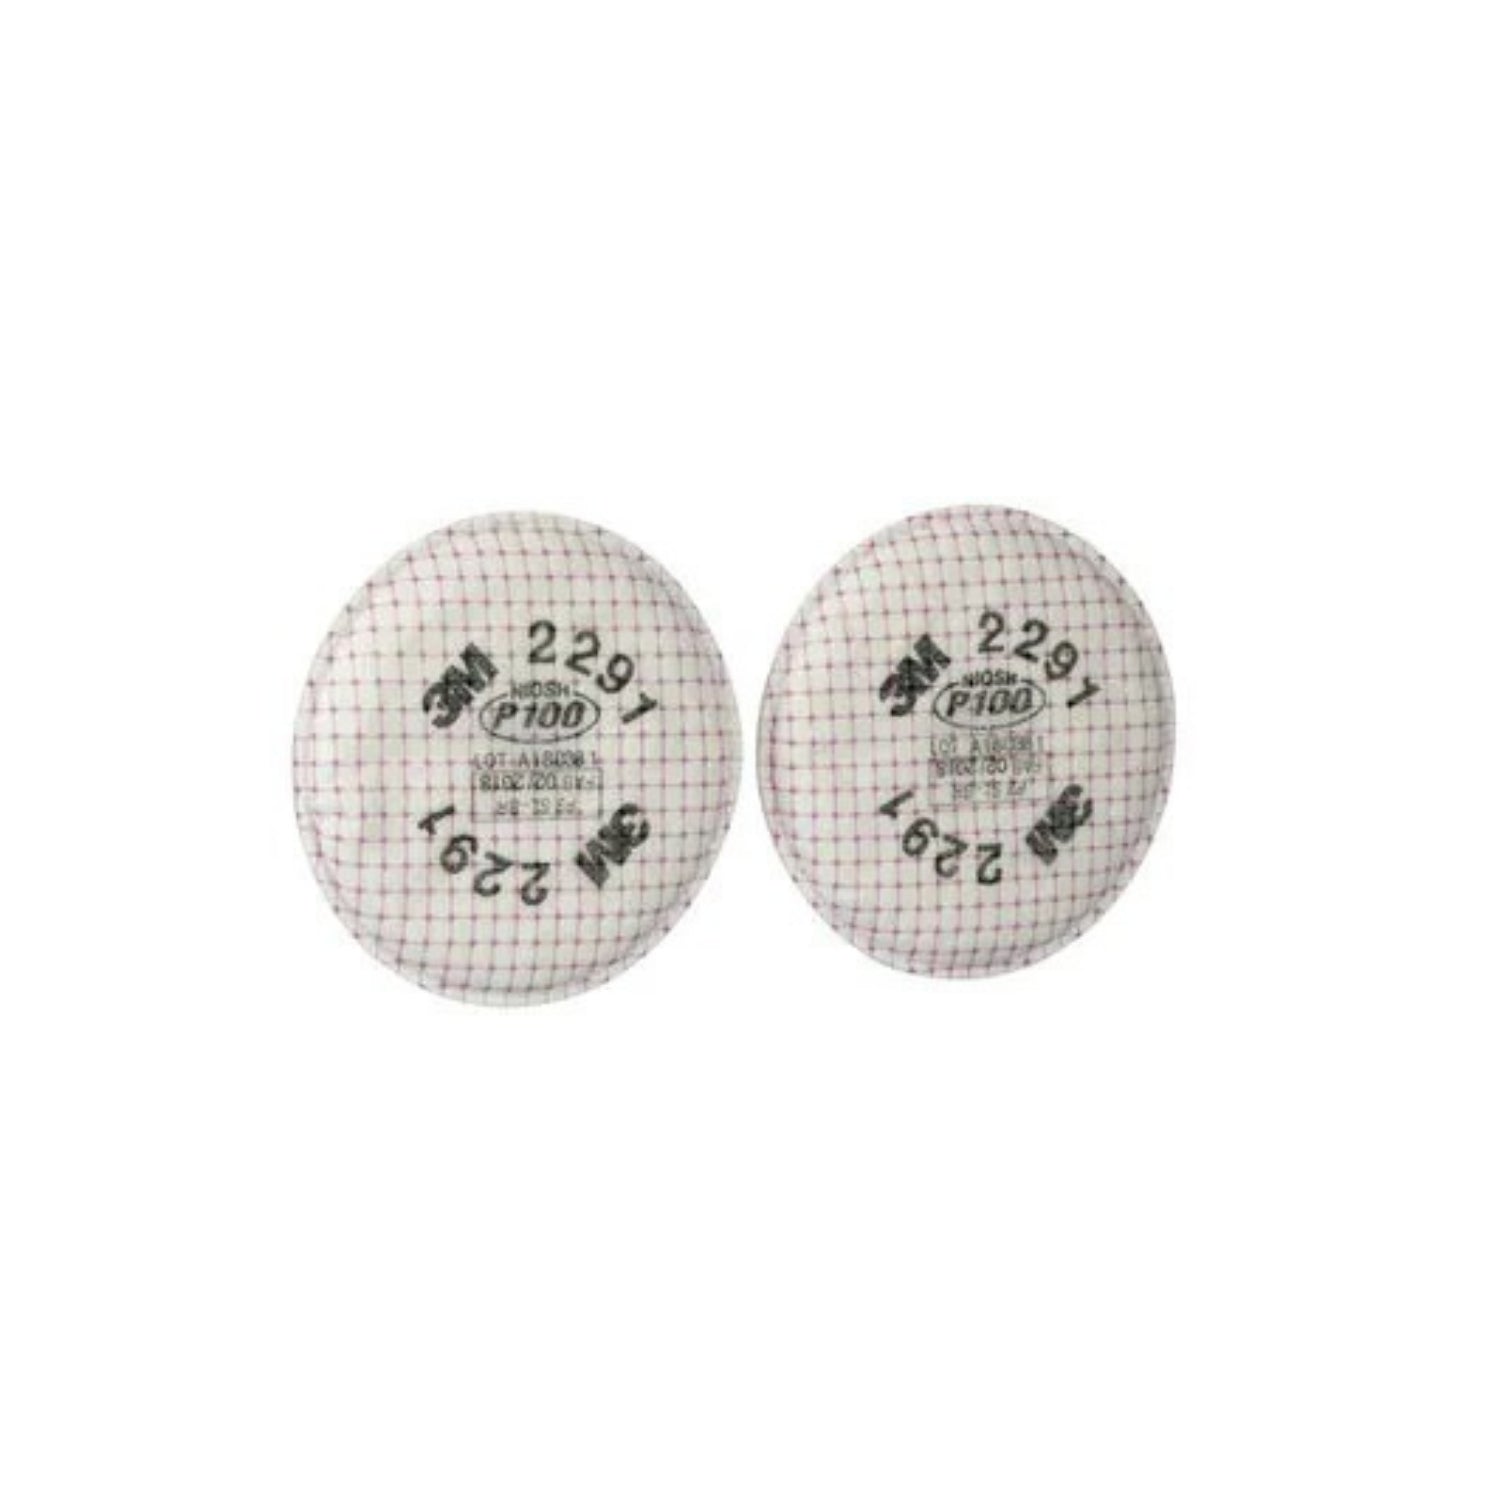 3M™ Advanced Particulate Filter 2291, P100 - Respiratory Protection